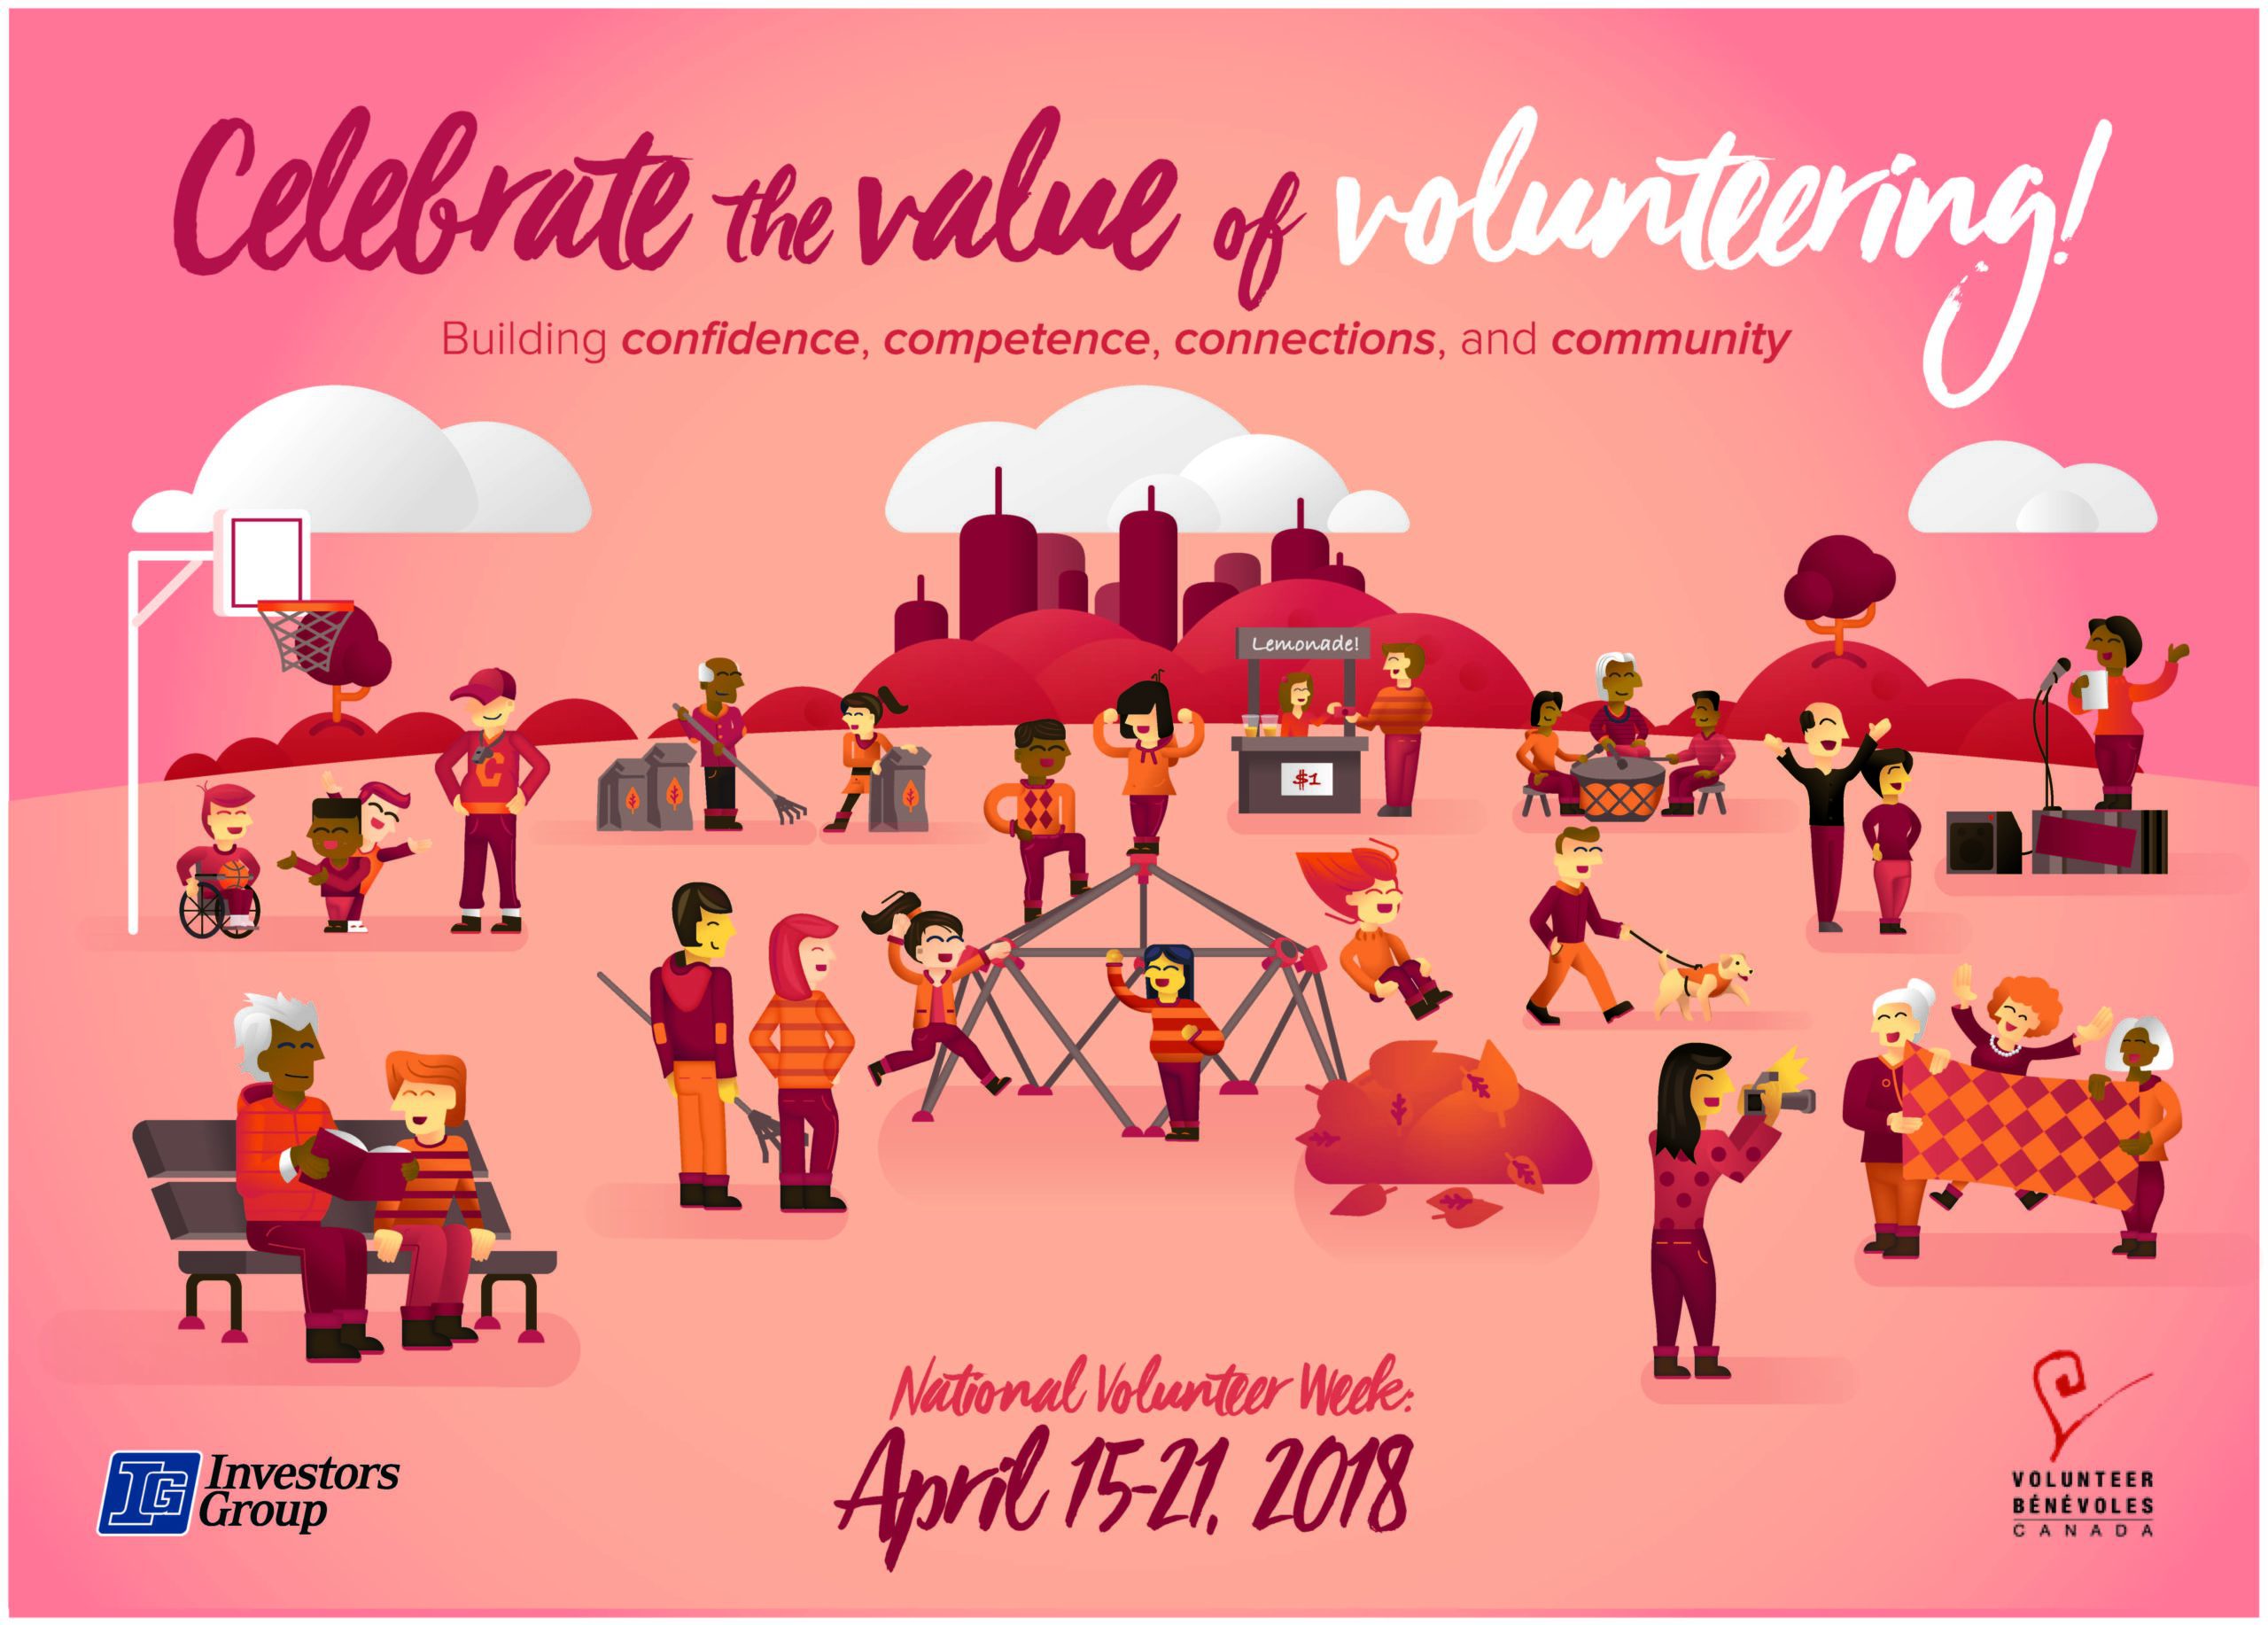 National Volunteer Week 2018: Celebrate the Value of Volunteering – building confidence, competence, connections and community